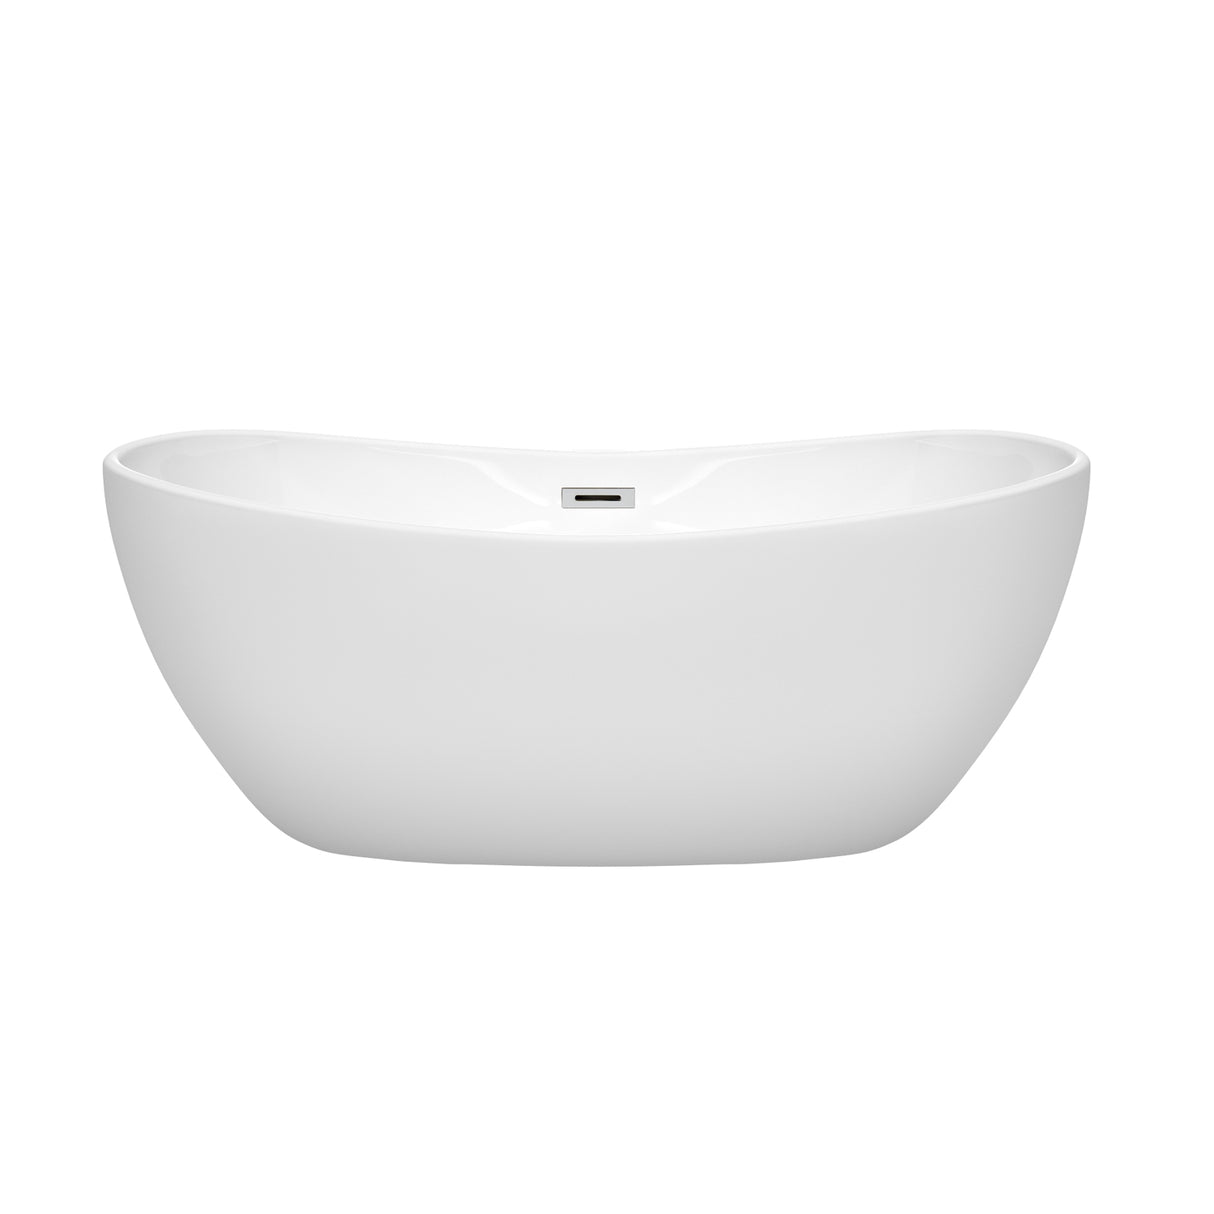 Rebecca 60 Inch Freestanding Bathtub in White with Polished Chrome Drain and Overflow Trim